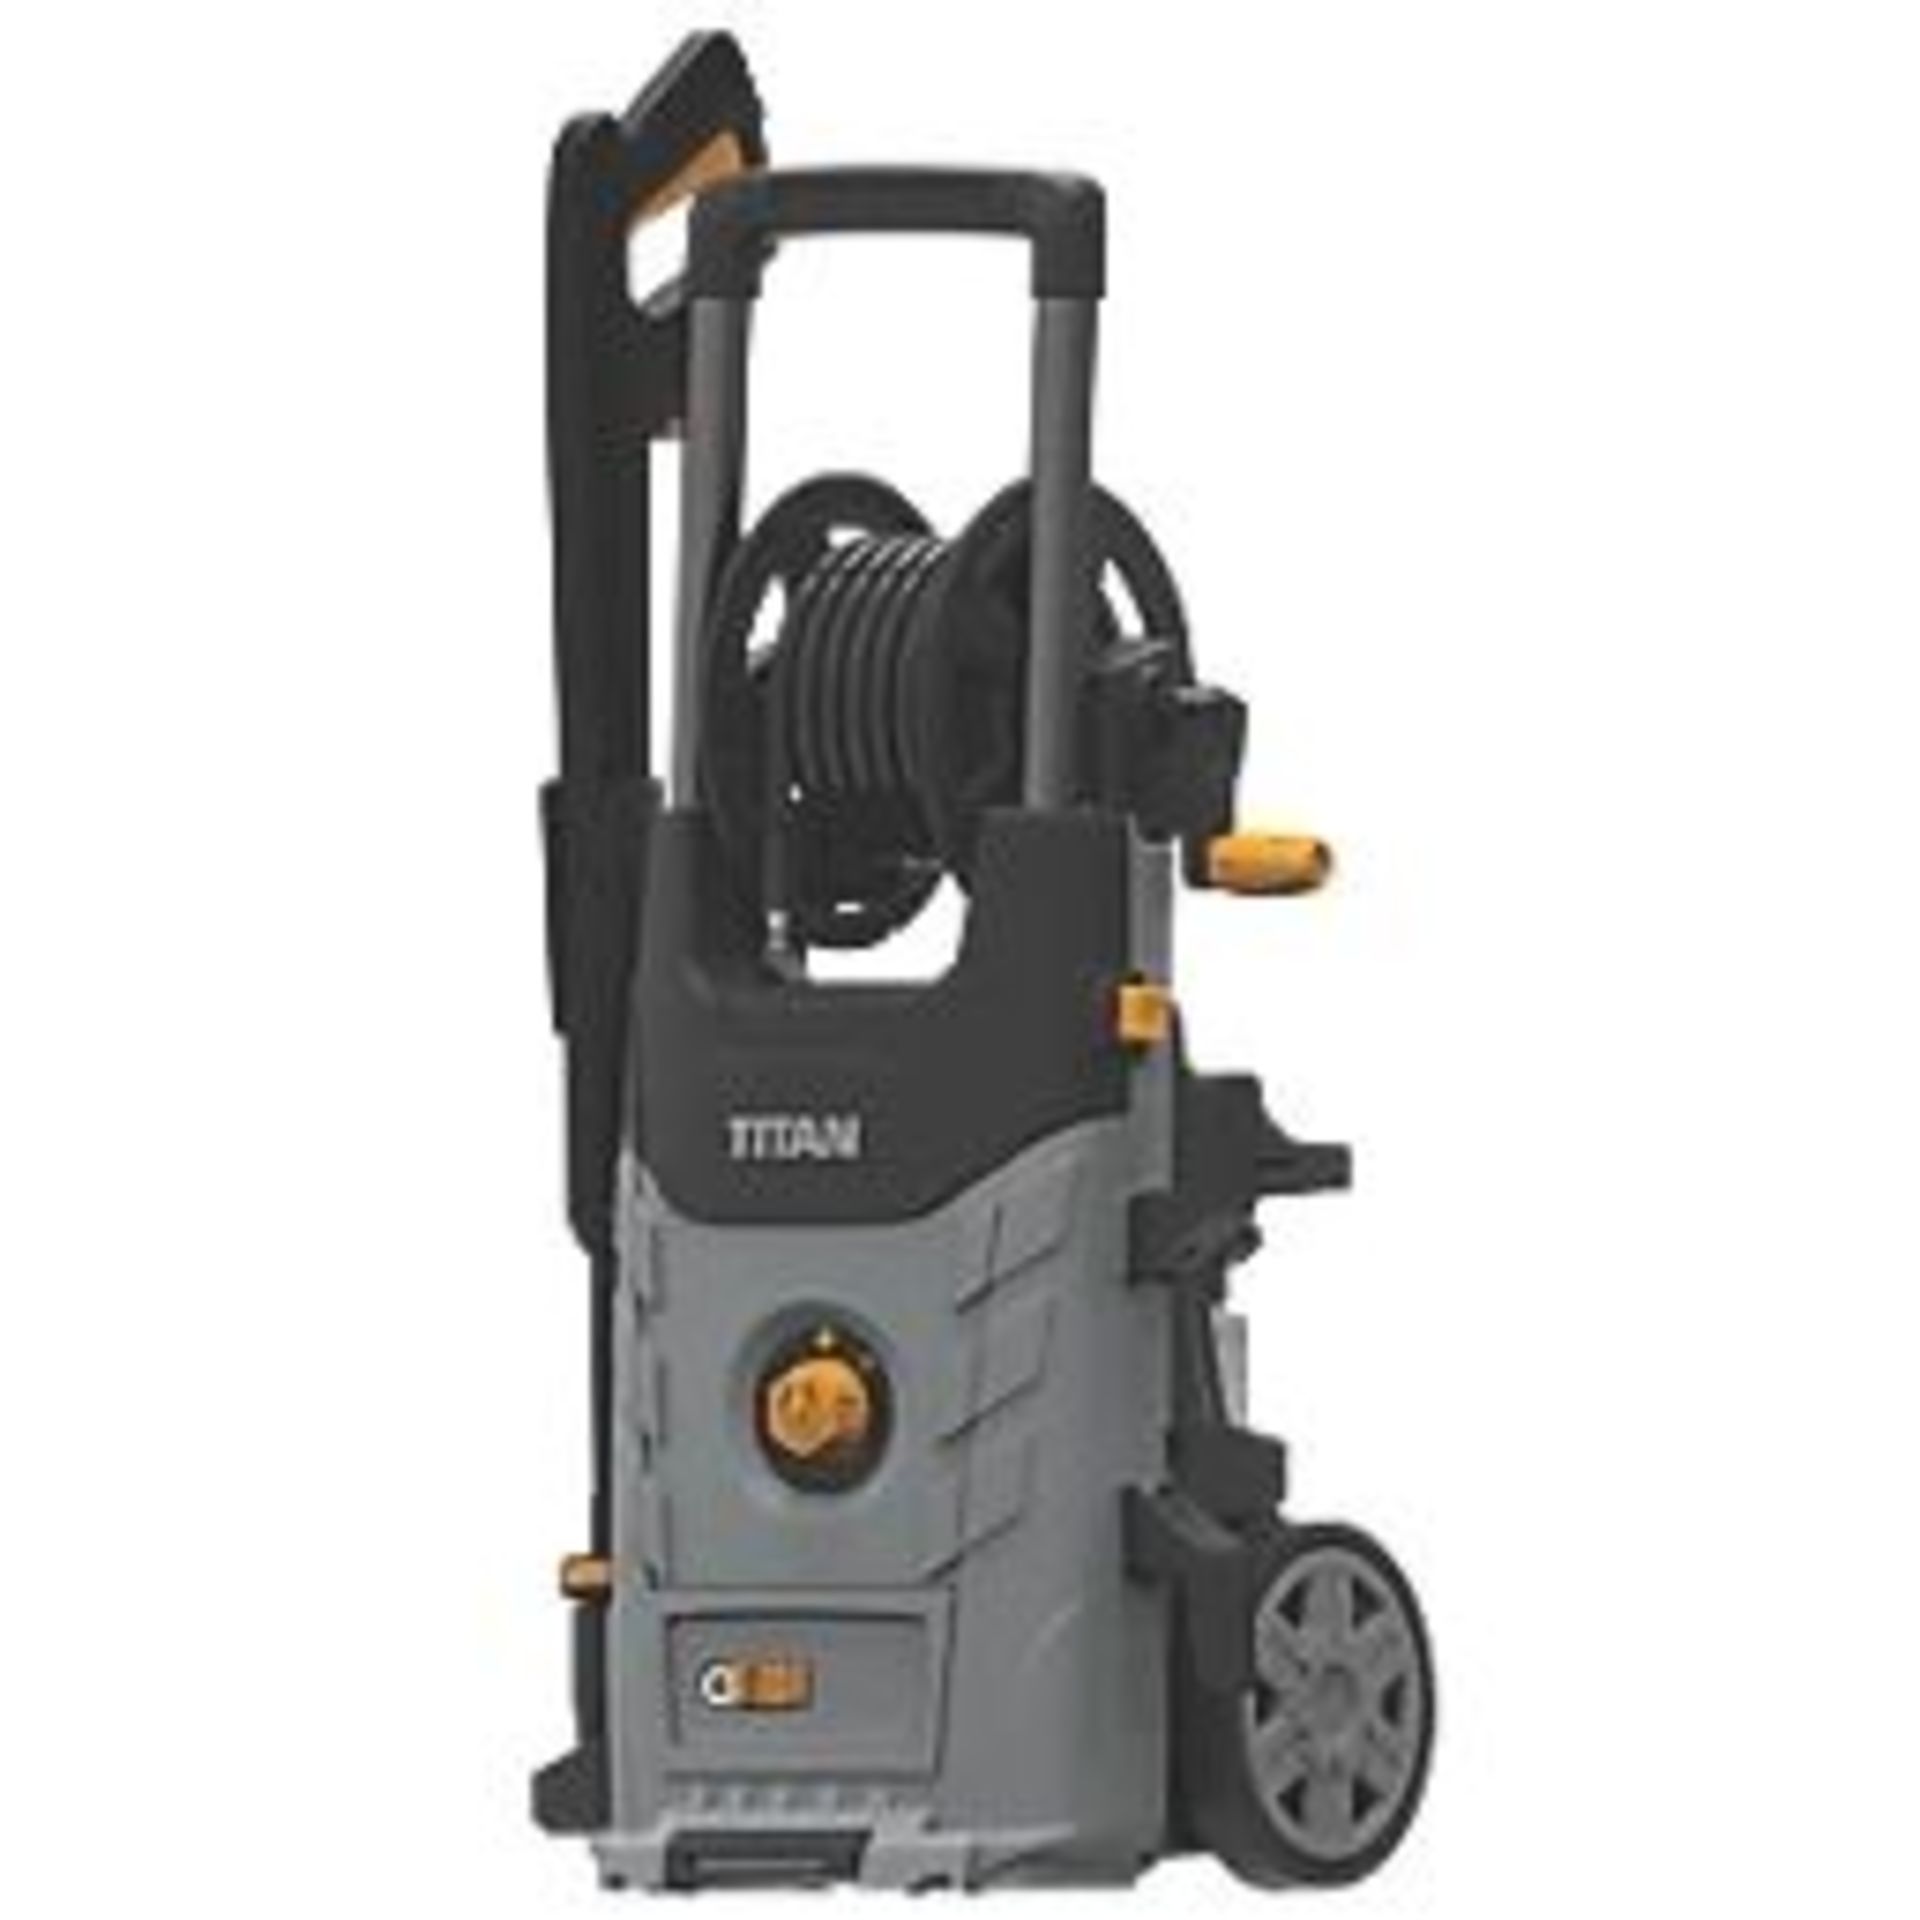 TITAN TTB2200PRW 150BAR ELECTRIC HIGH PRESSURE WASHER 2.2KW 230V. - S2.11. Compact design with